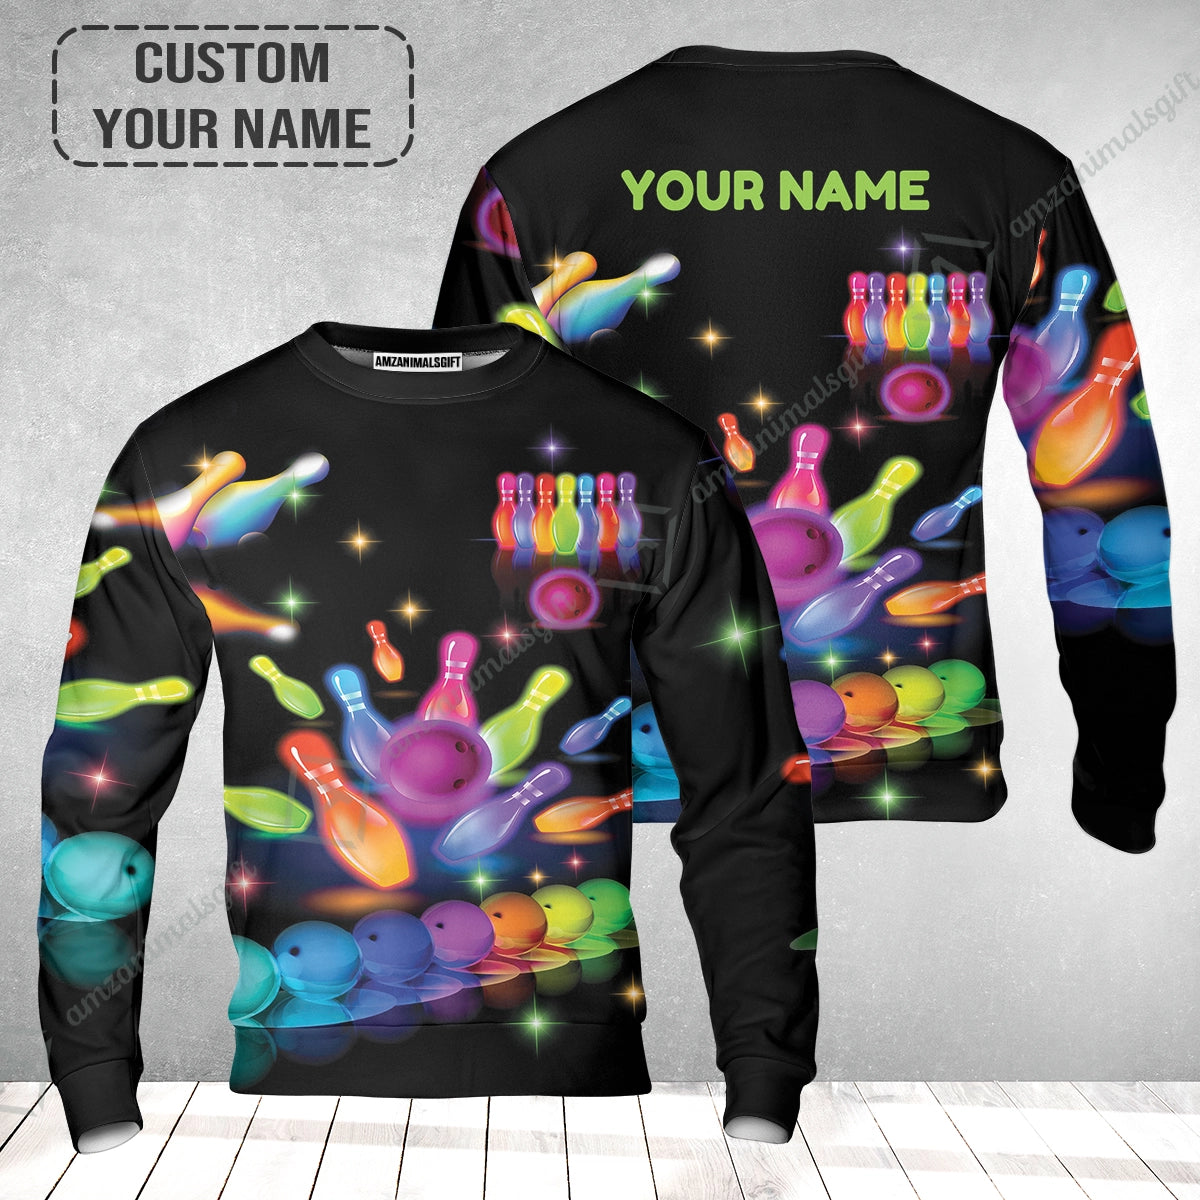 Bowling Sweatshirt With Custom Name, Colorful Bowling Pattern Sweatshirt For Men And Women, Perfect Outfits For Bowling Lovers, Bowlers